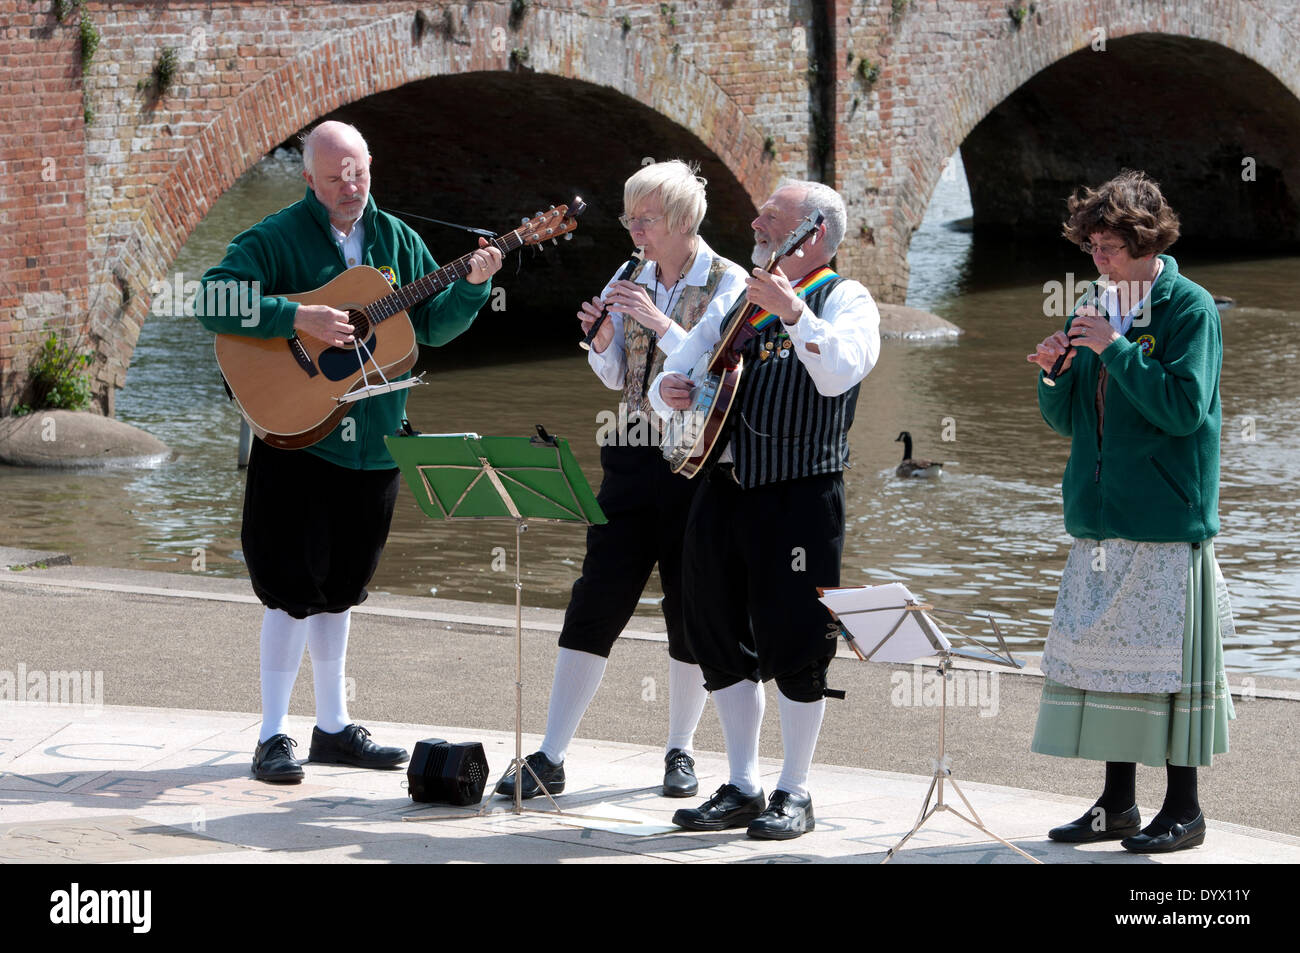 Stratford-upon-Avon, Warwickshire, England, UK. 26th April 2014.  William Shakespeare`s 450th Birthday Celebrations. Musicians in period-style dress playing alongside the River Avon as part of the celebrations. Credit:  Colin Underhill/Alamy Live News Stock Photo